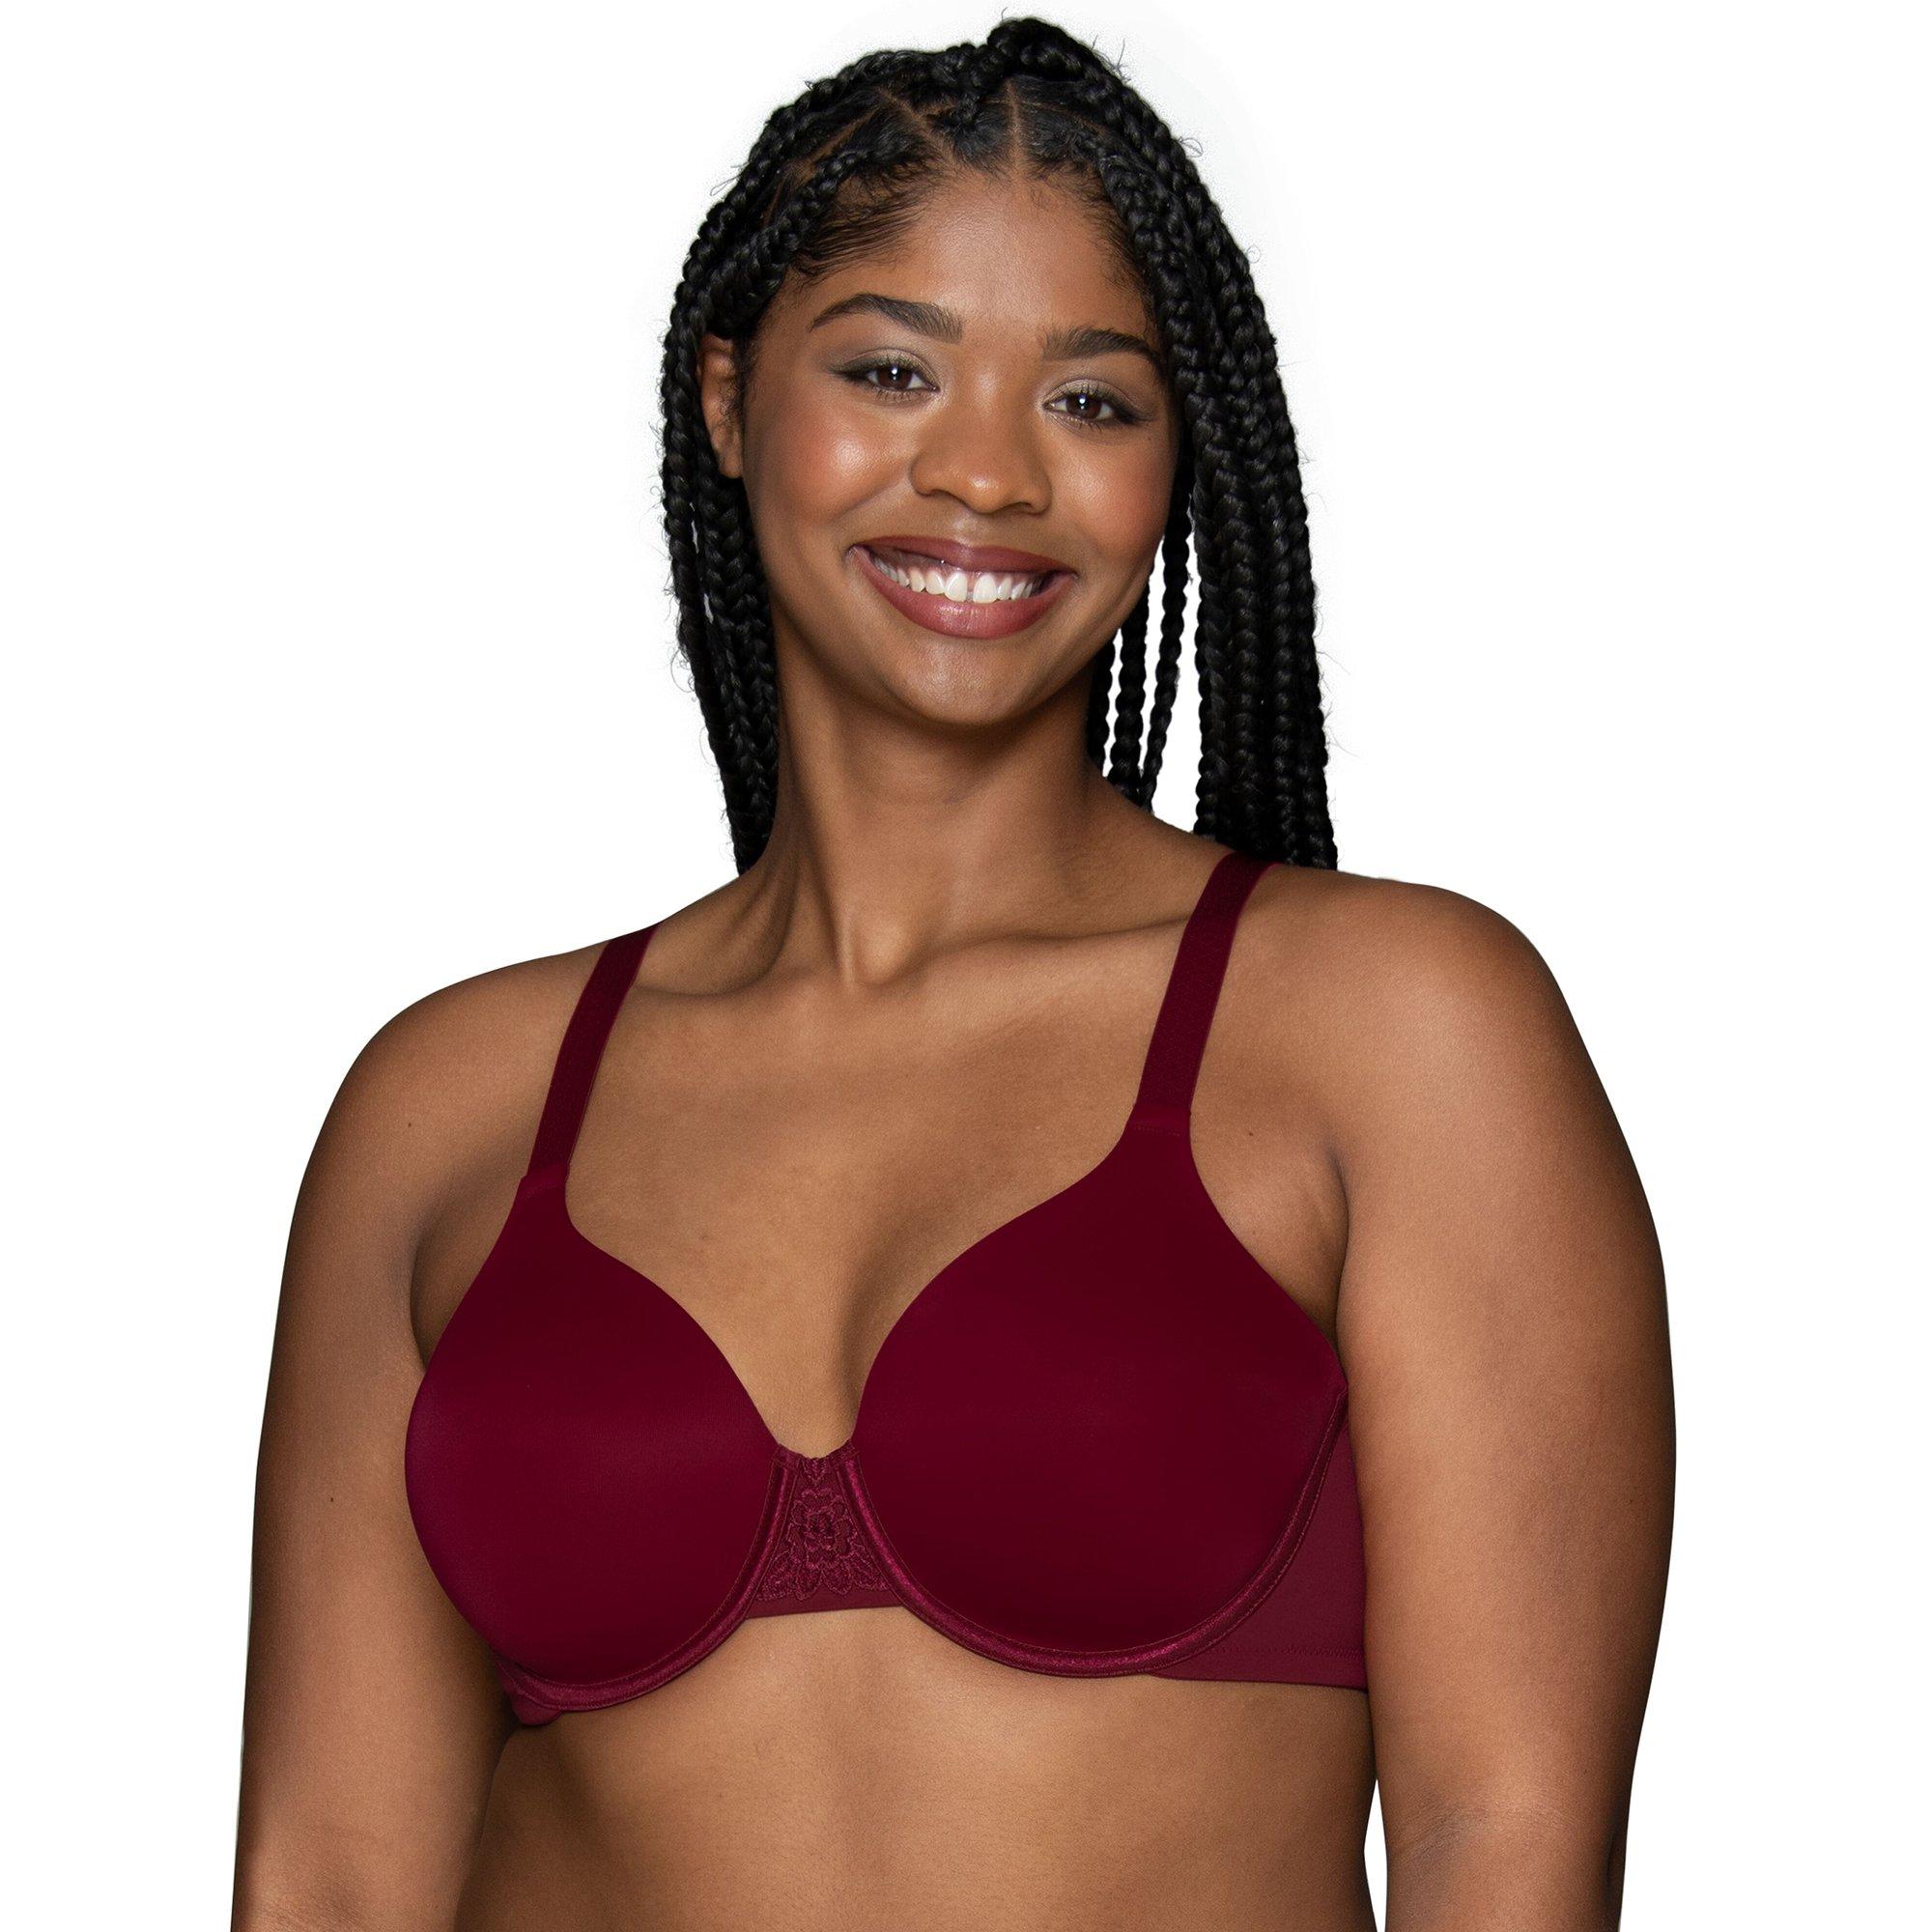 Underwire - All Styles - Bras  Price: $40.00 - $49.99; Collection: BLUSHING